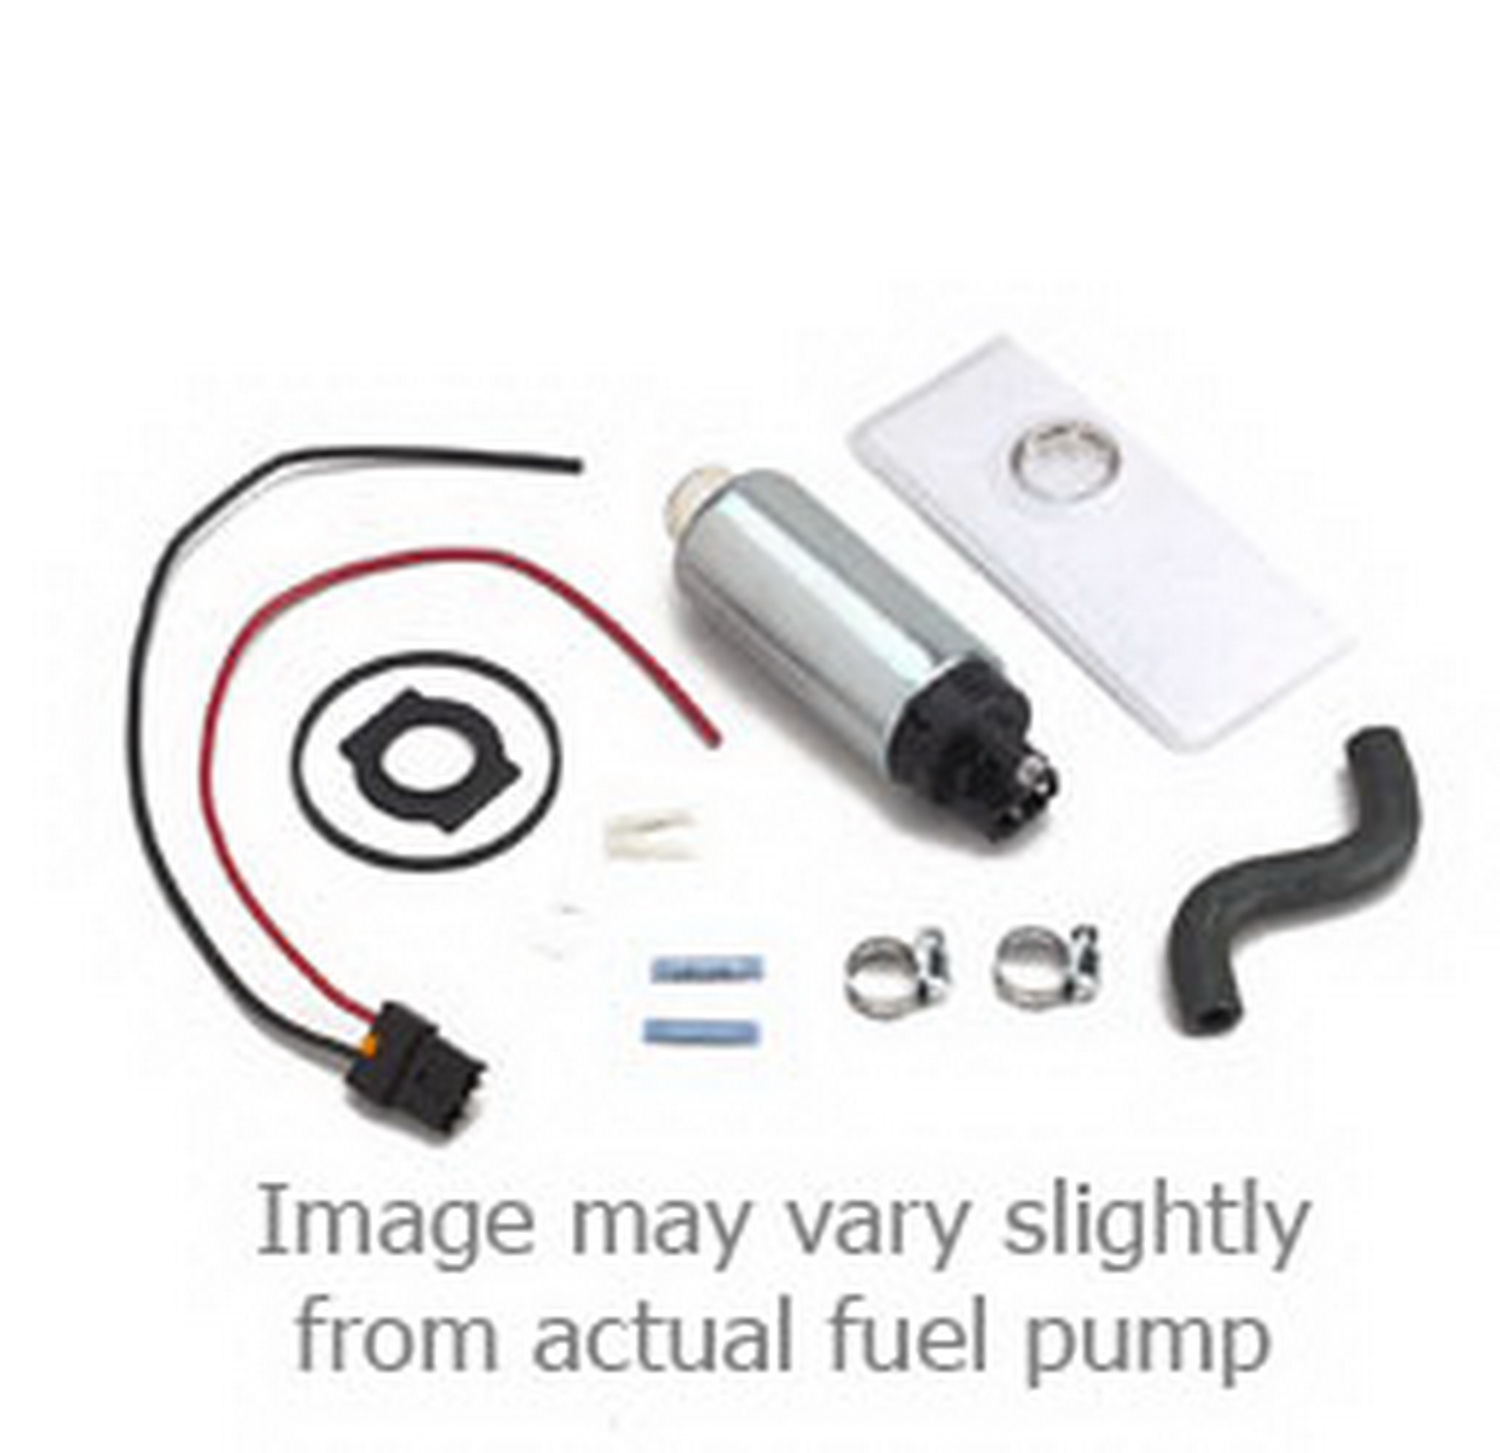 Holley Performance Holley Performance 12-914 Electric Fuel Pump; In-Tank Electric Fuel Pump